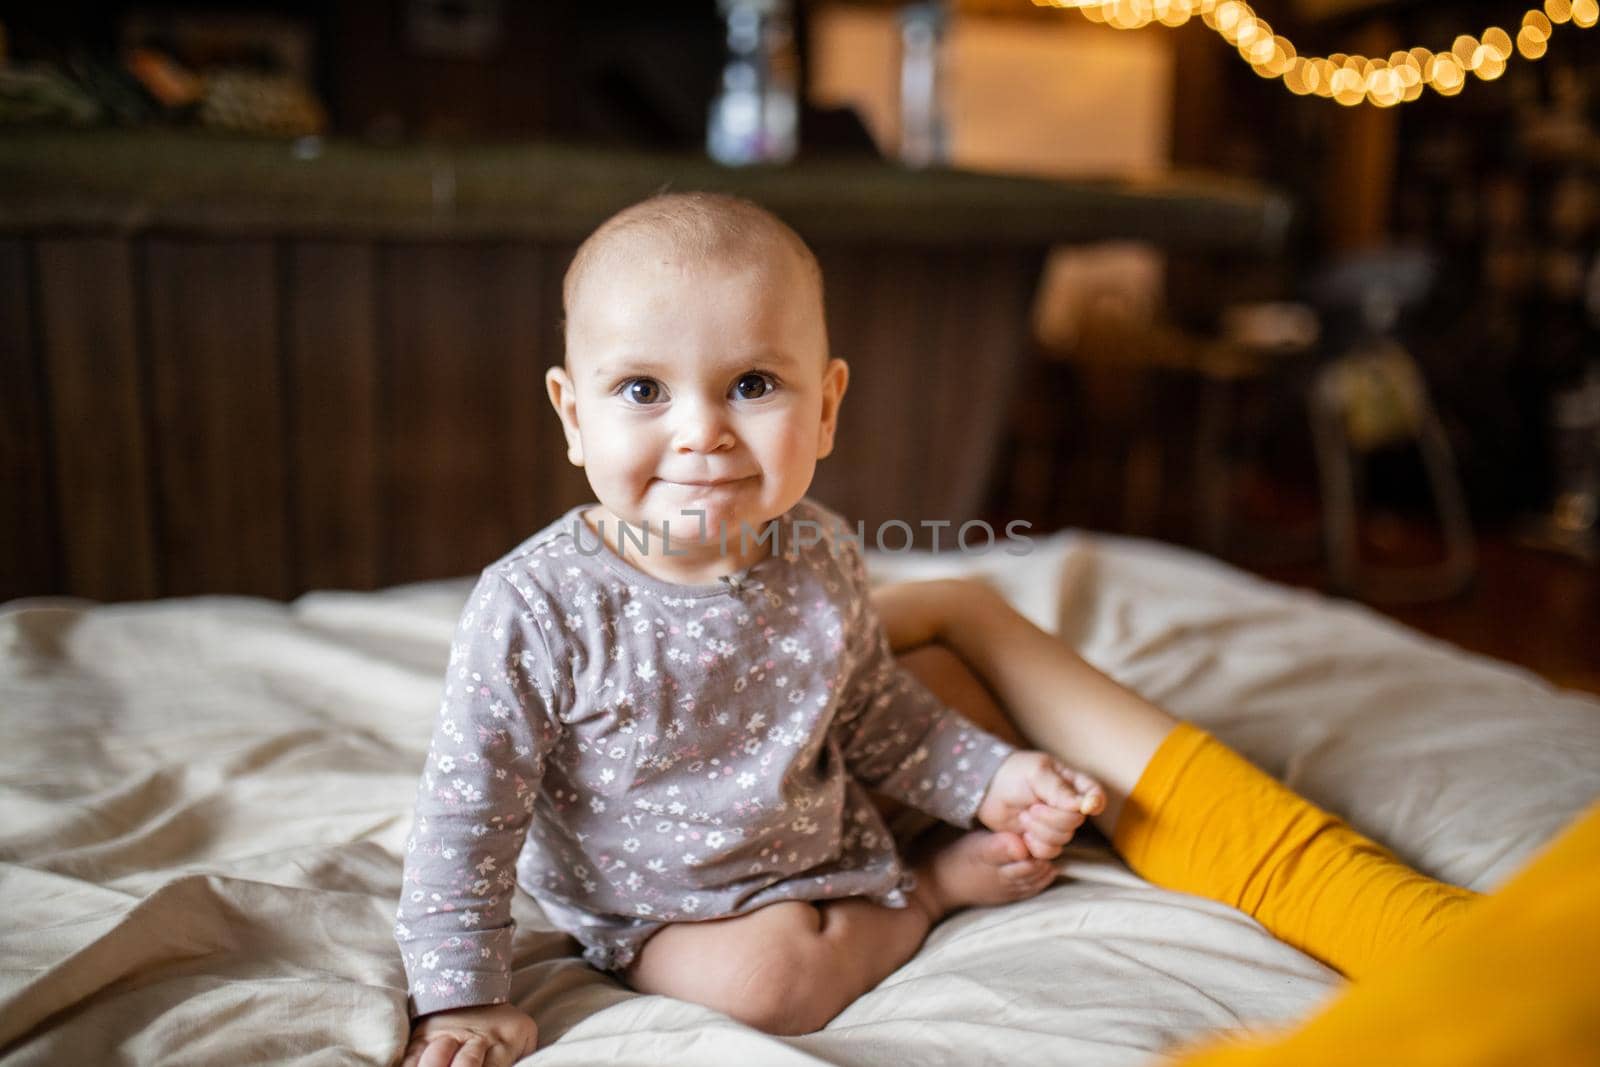 Adorable and happy baby sitting on bed with blurry background. Lovely baby on bed with cream color sheets next to her mother. Cute toddlers